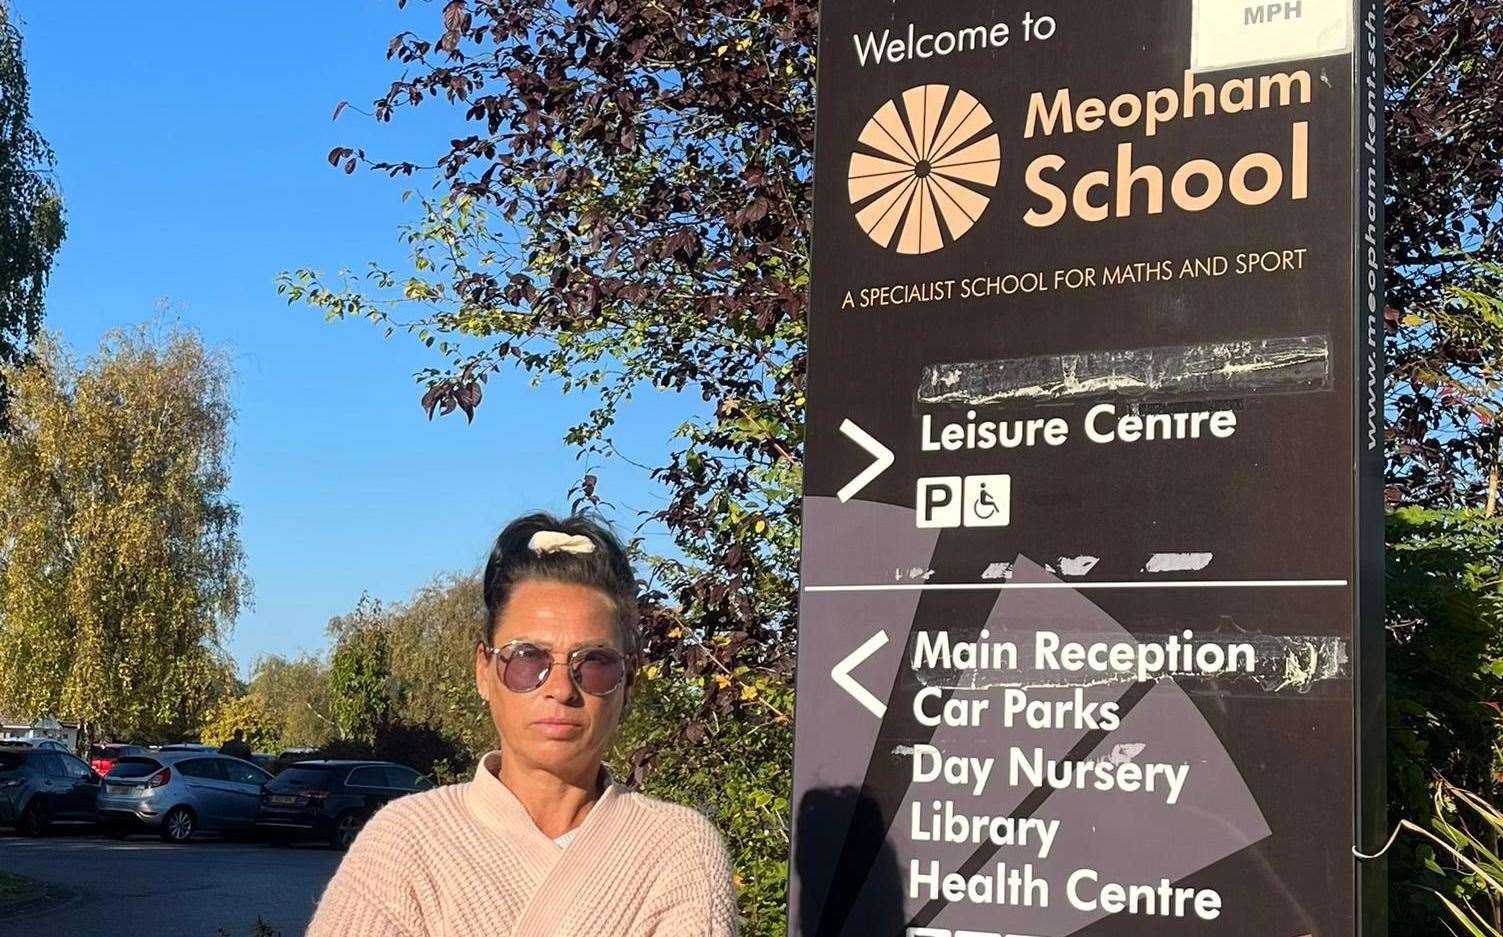 Alexandra Mason, from Gravesend, fears her children could be seriously hurt at Meopham Secondary School